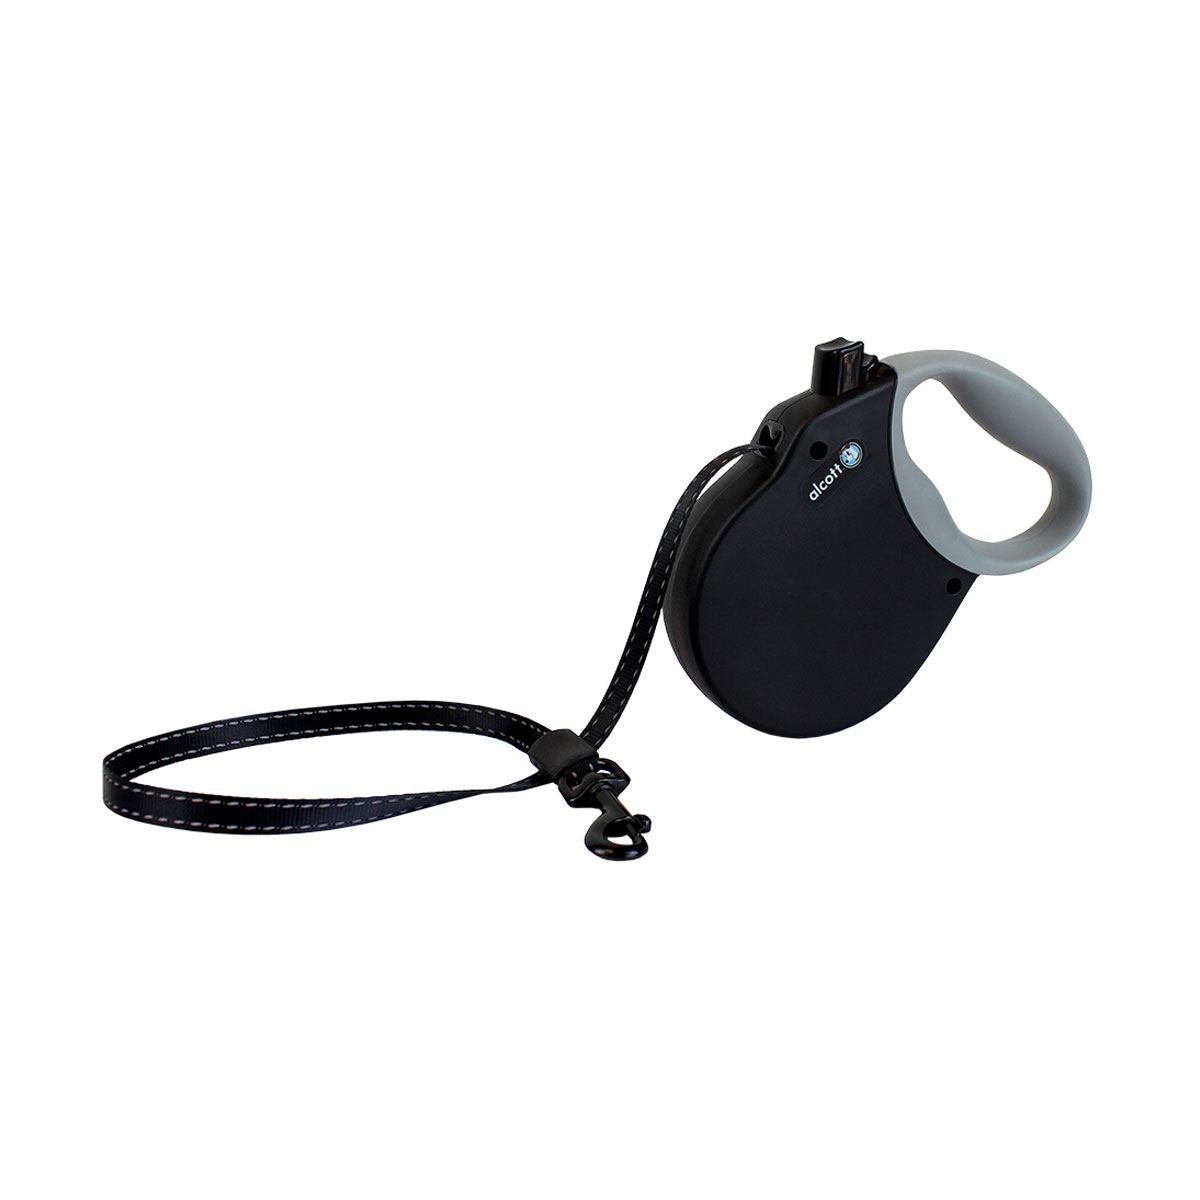 Alcott Products Adventure Retractable Leash - Just Horse Riders